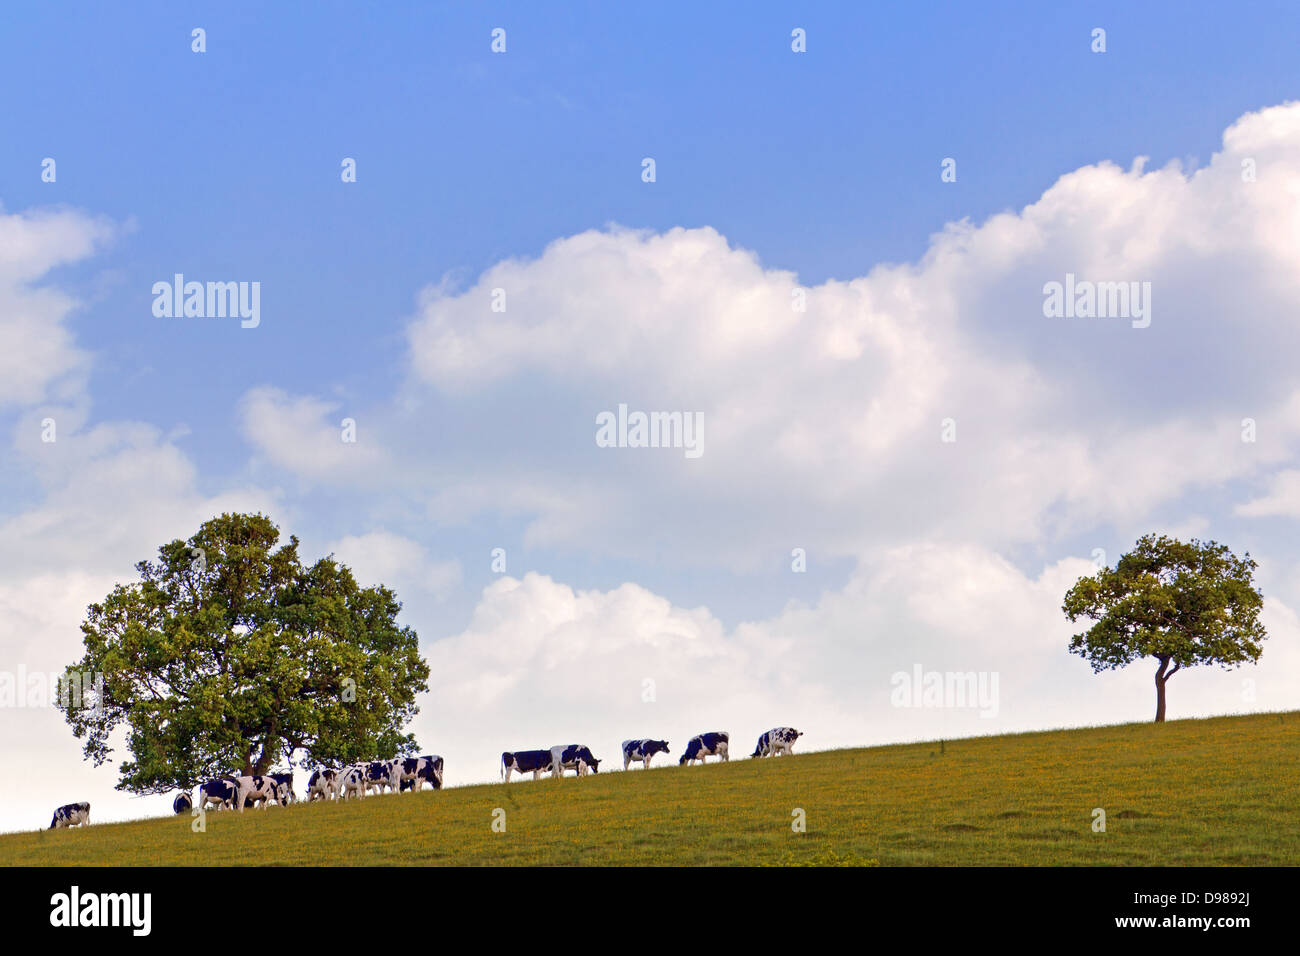 Dairy cows grazing on a hillside between two oak trees against a bright blue cloudy sky. Stock Photo